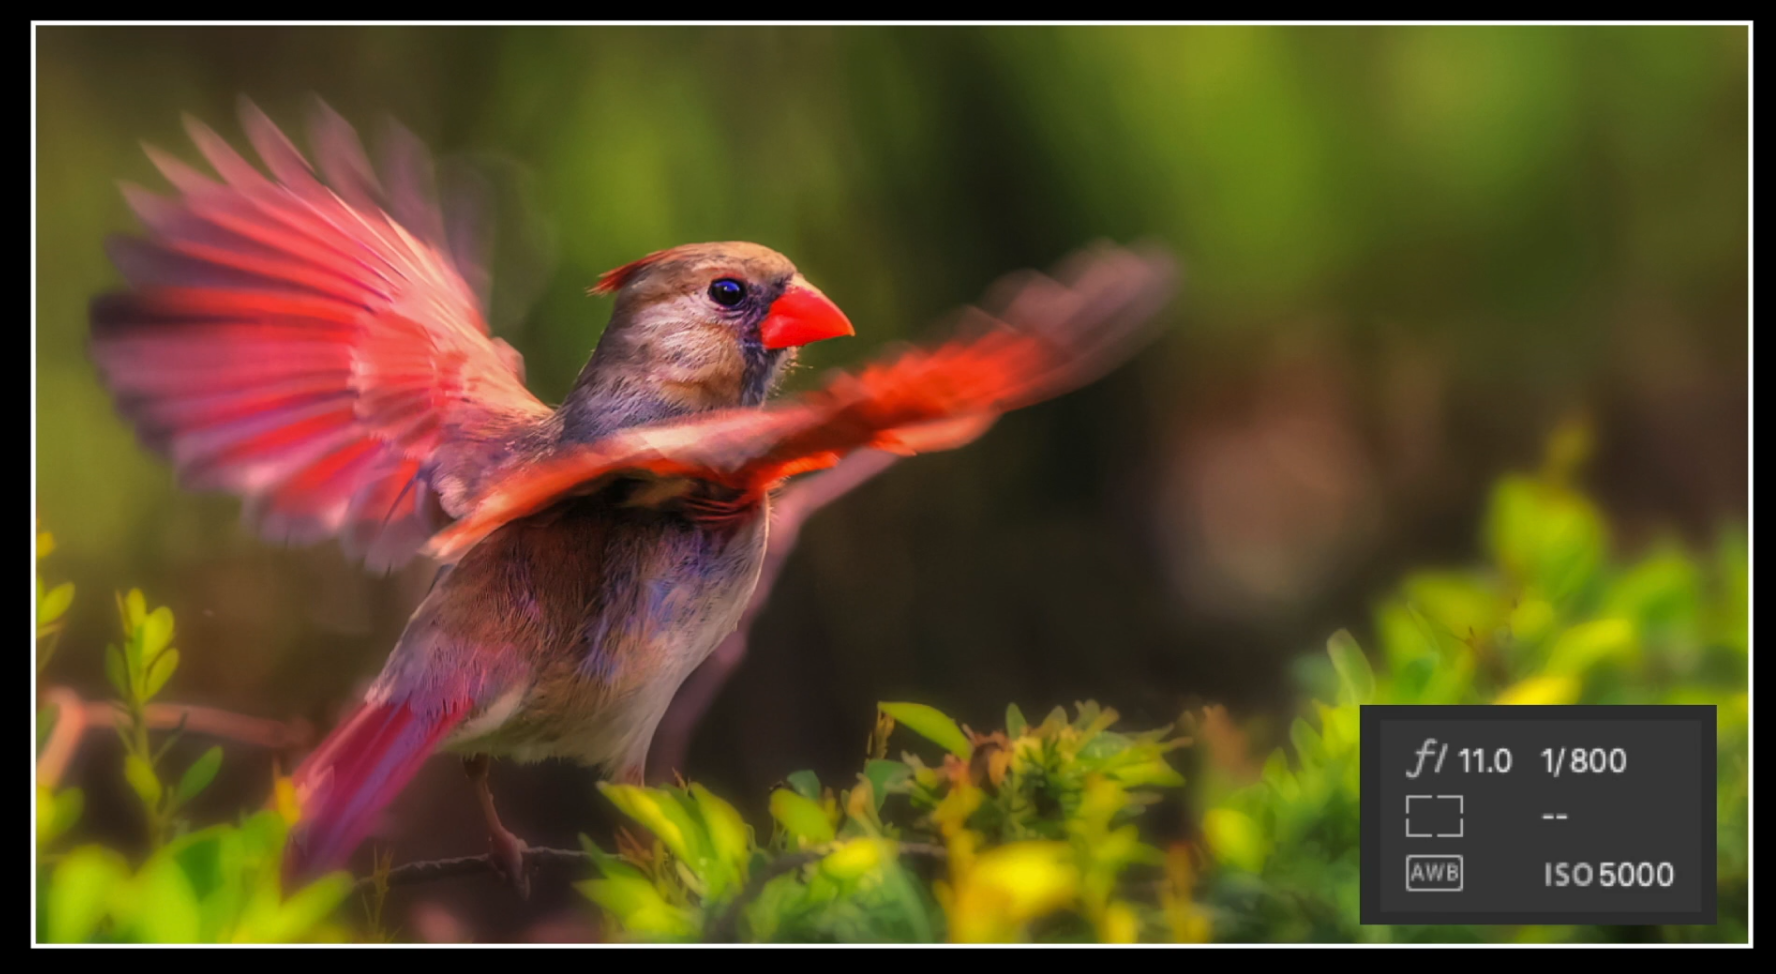 This Rick Sammon image of a cardinal shows movement in the wings while they eye is tack sharp.